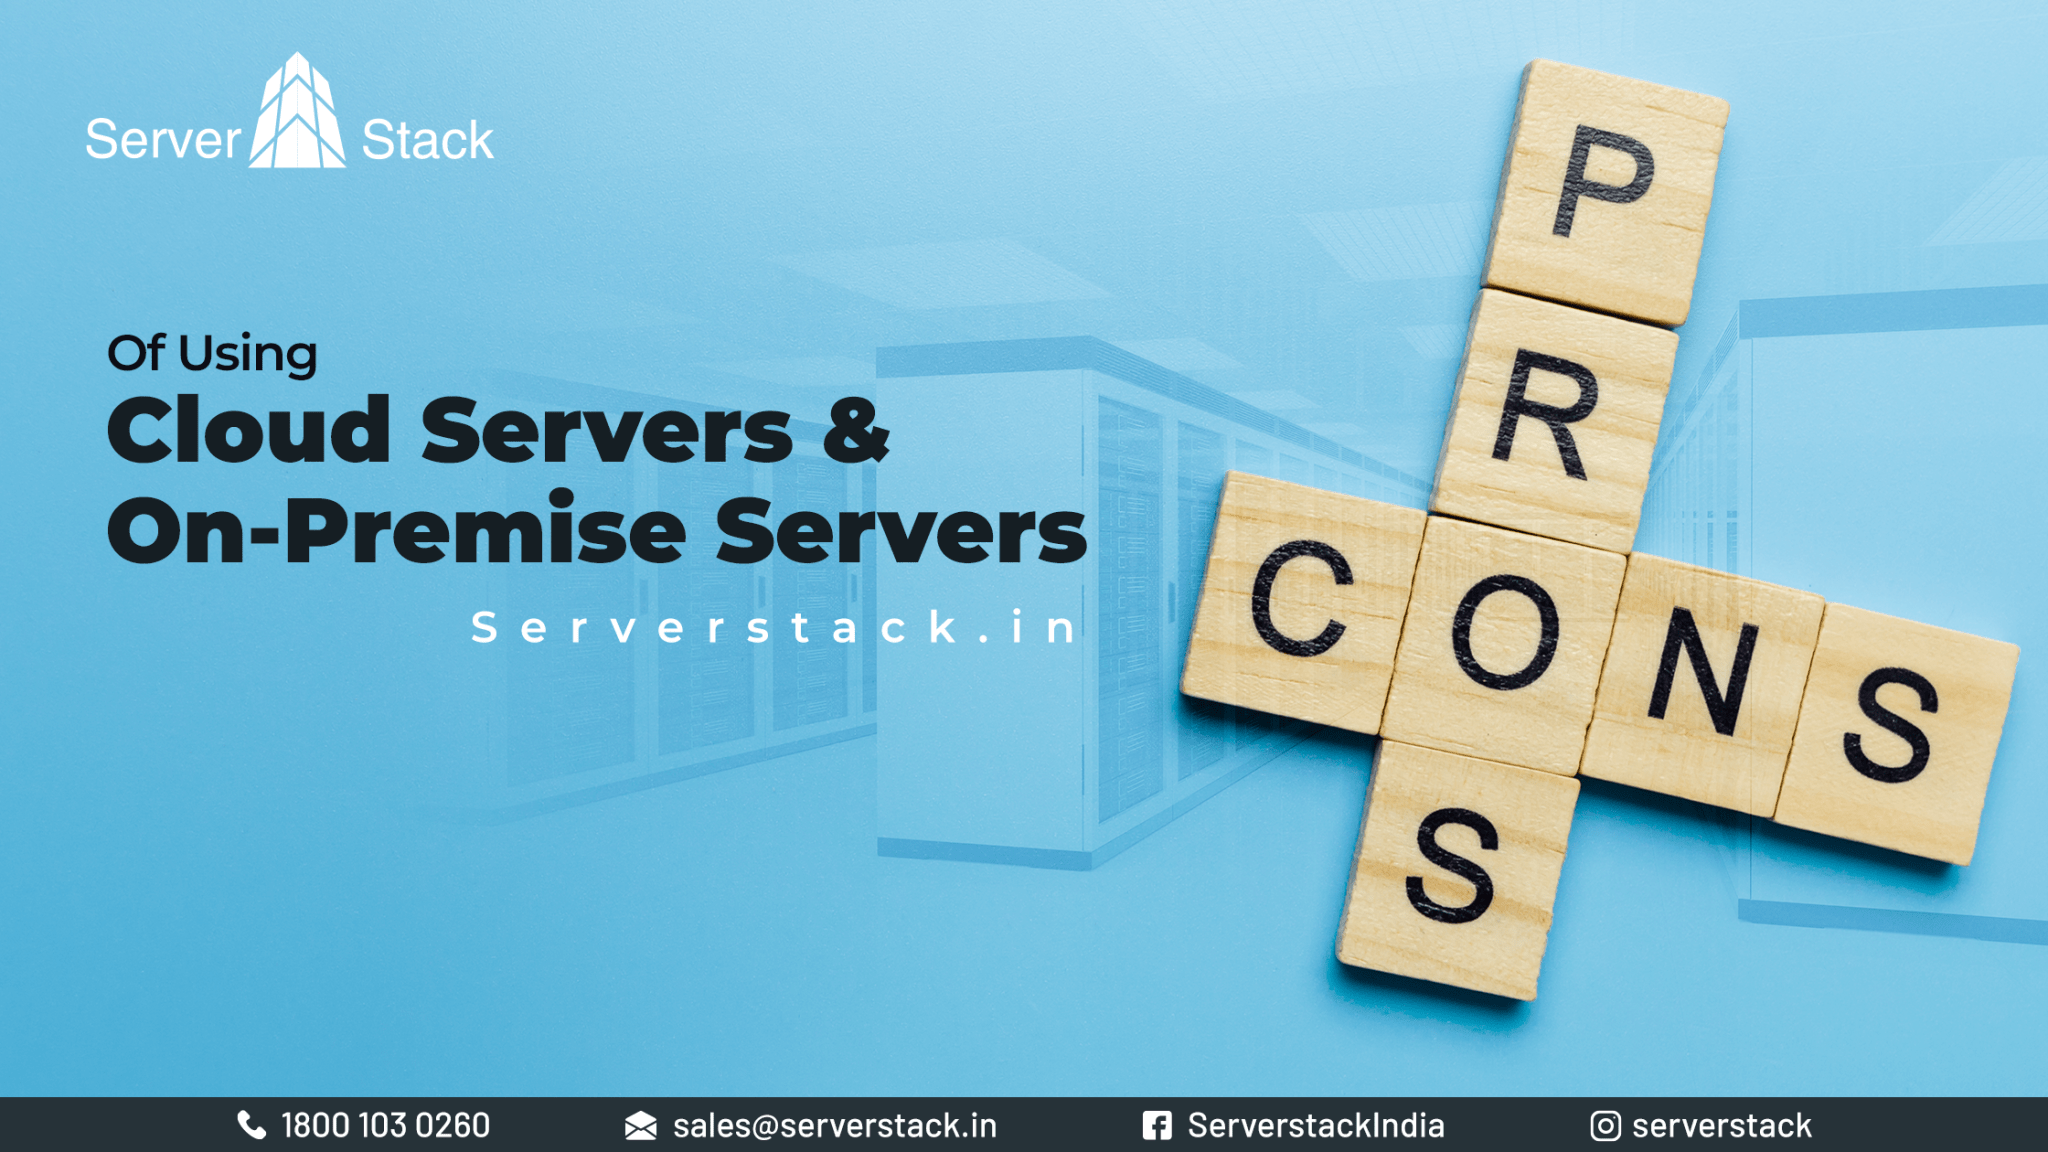 Pros and Cons of Cloud servers and On-premise servers